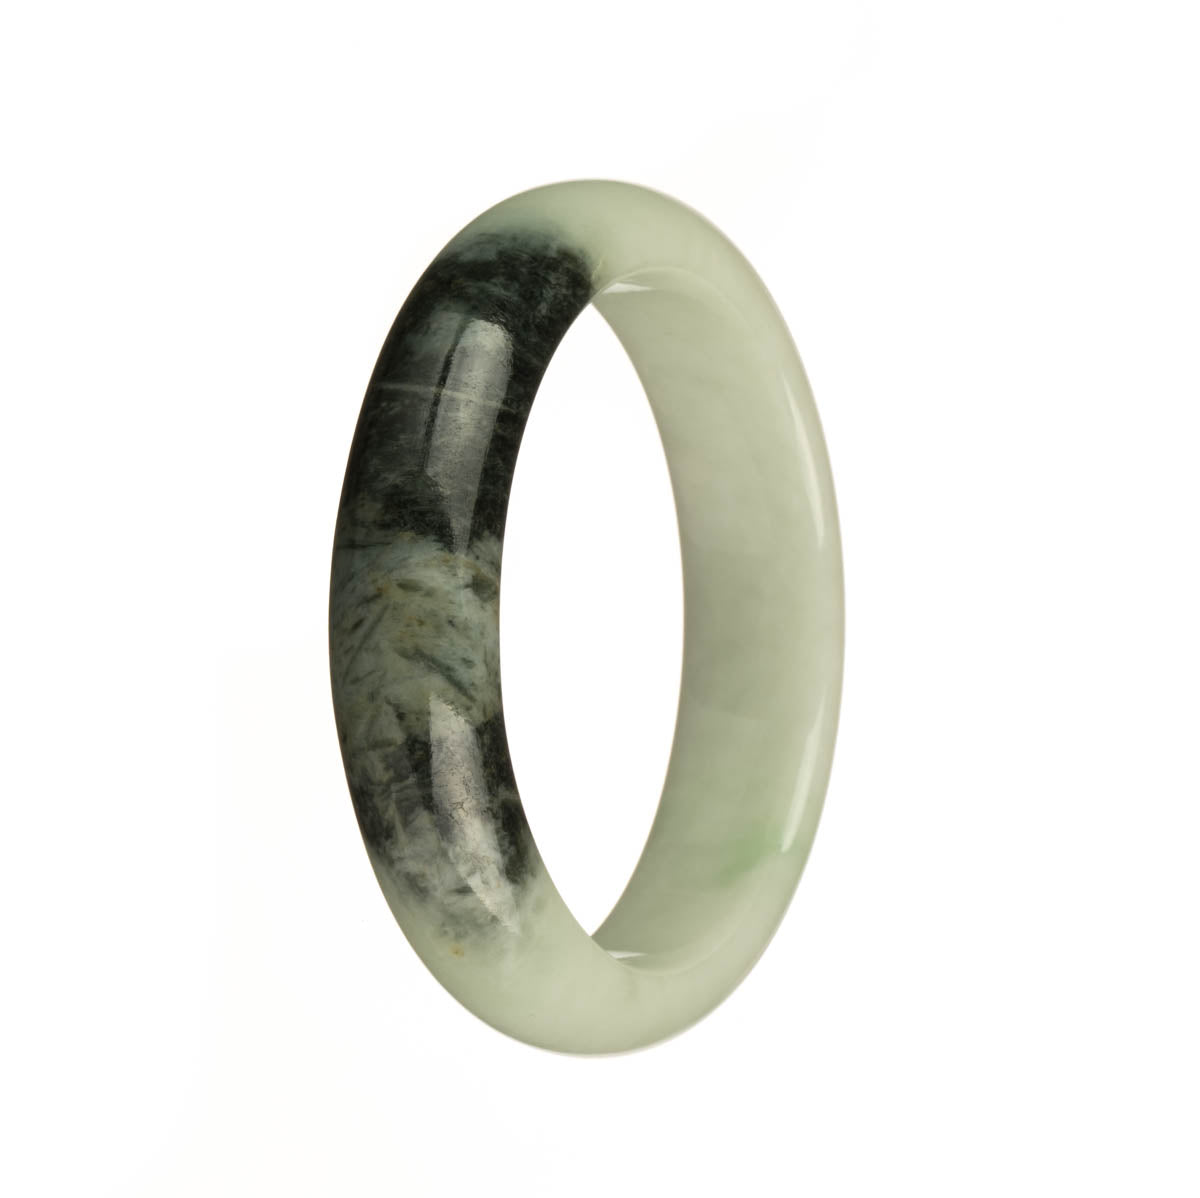 A stunning bracelet made of genuine Burma Jade, featuring a pale green color with beautiful dark green patterns and an eye-catching apple green patch. The bracelet is in a 55mm half moon shape.